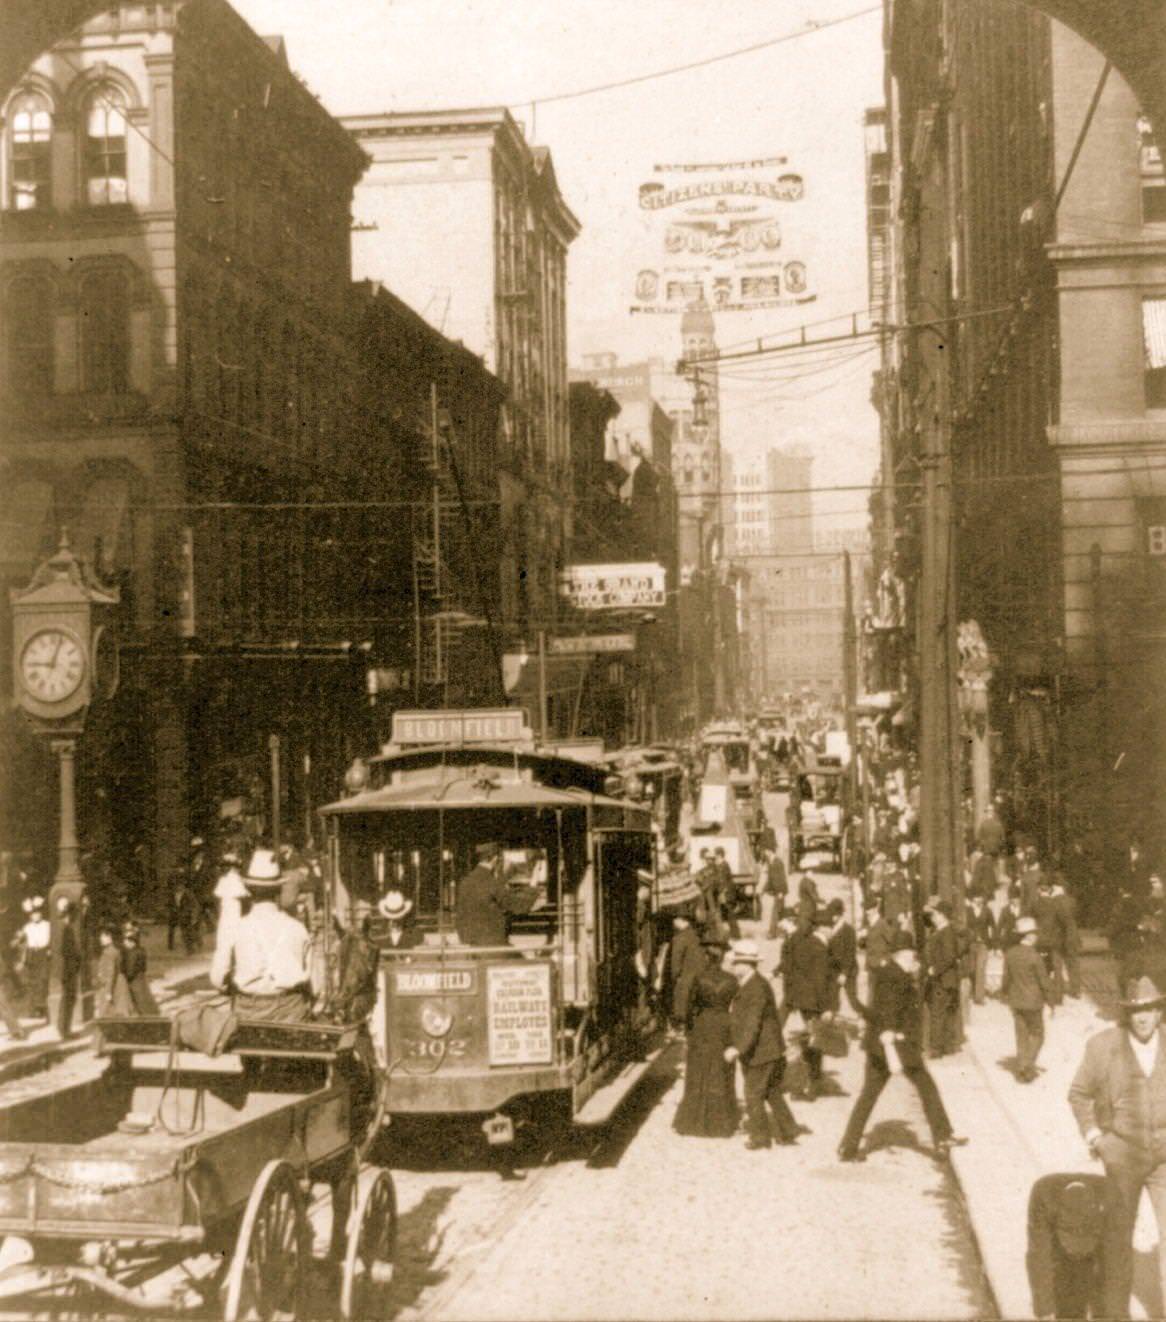 Bustling 5th Avenue west from Smithfield in Pittsburgh, featuring trolley cars and pedestrians, 1903.